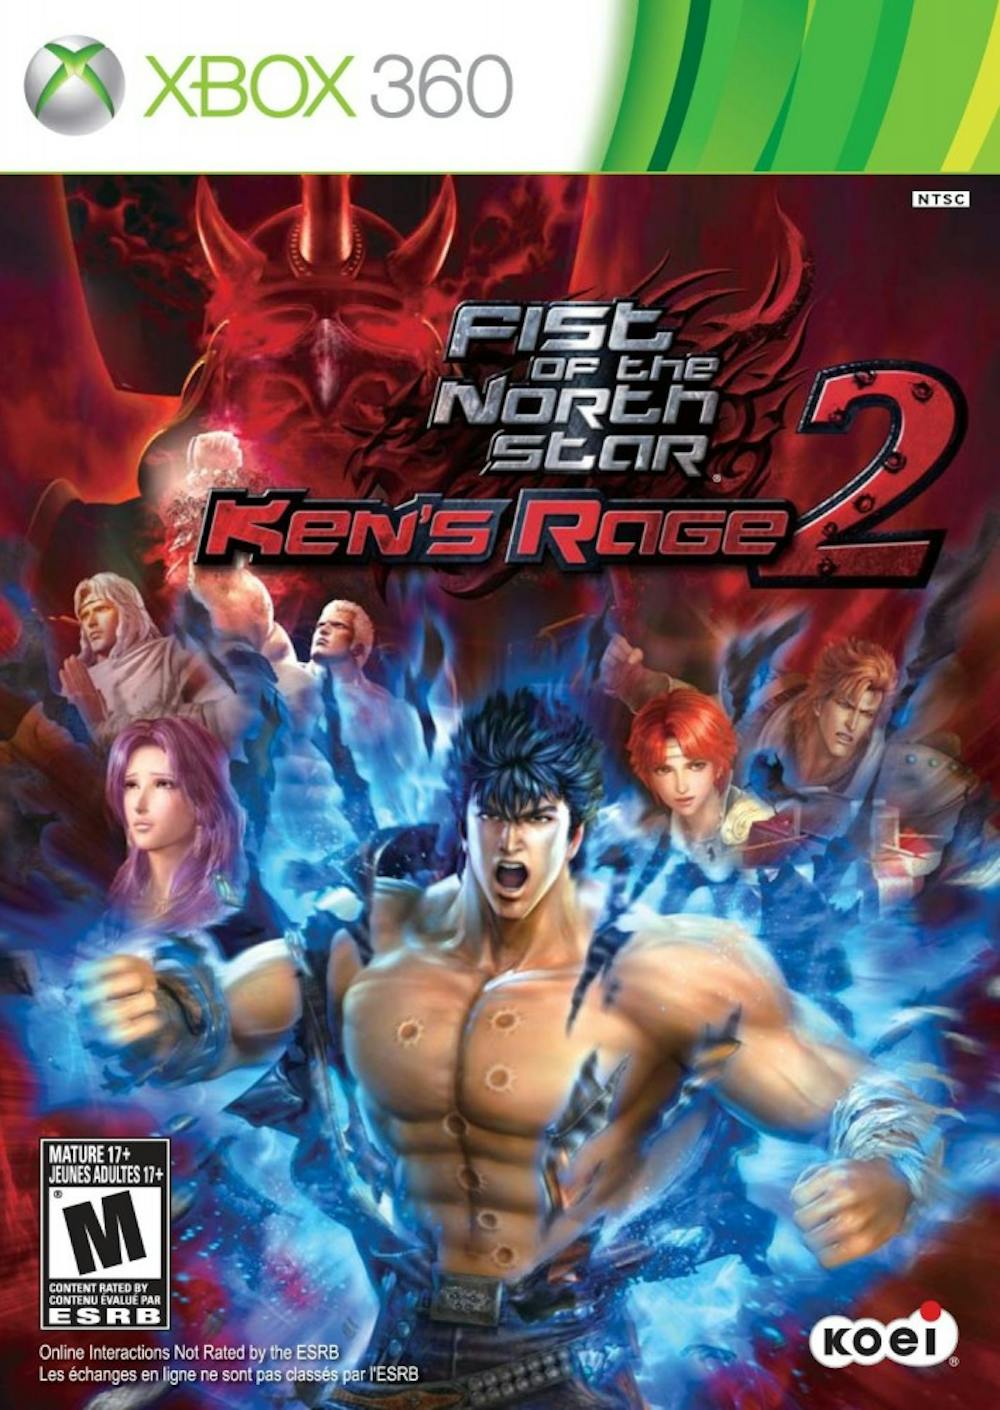 Sequel to ‘Fist of the North Star’ pretty good, but similar to original